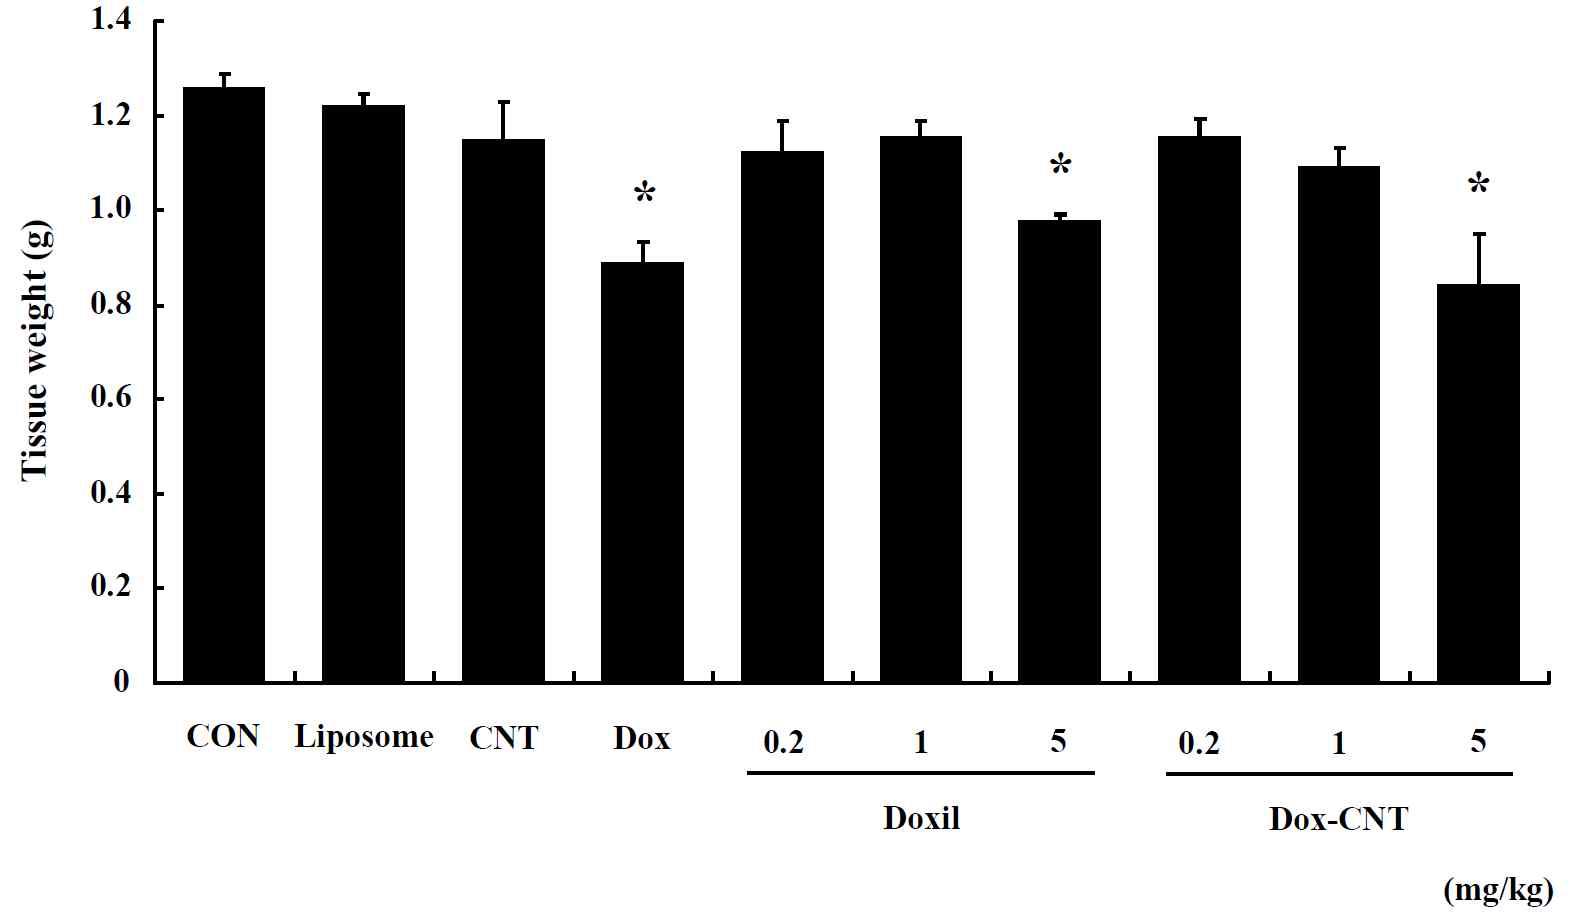 The change of liver weight in male ICR mice of repeated exposure for 14 days. Mice were respectively administered by intravenous injection with liposome, CNT, Dox, Doxil (0.2, 1, 5 mg/kg) and Dox-CNT (0.2, 1, 5 mg/kg). The results are presented as mean ± SE (n = 10). * p < 0.05, significantly different from the control.